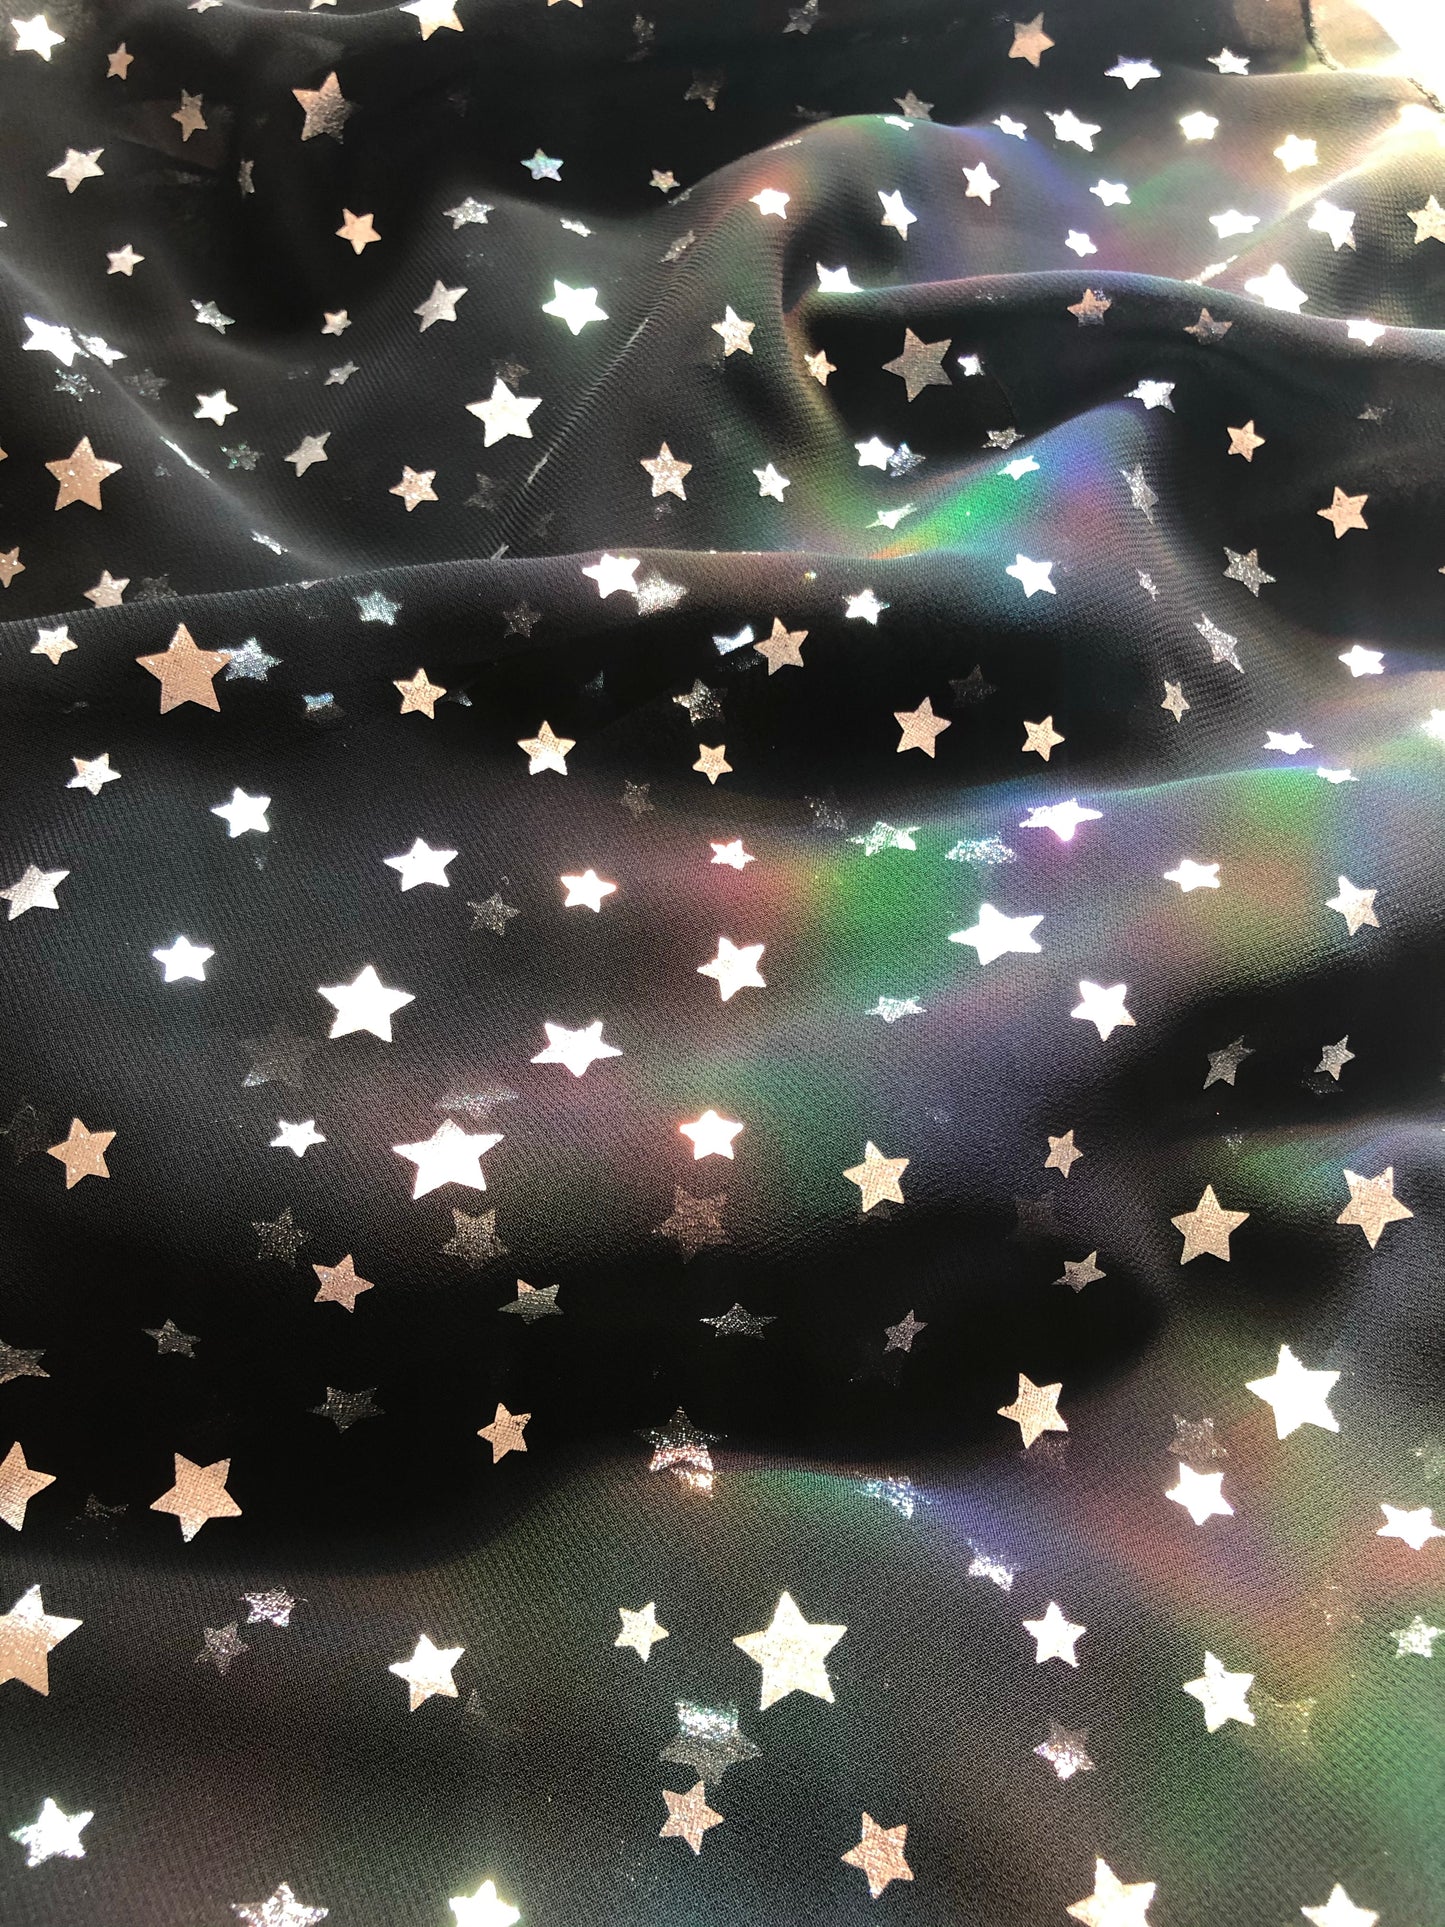 Beach Cover Up - Black And Silver Stars